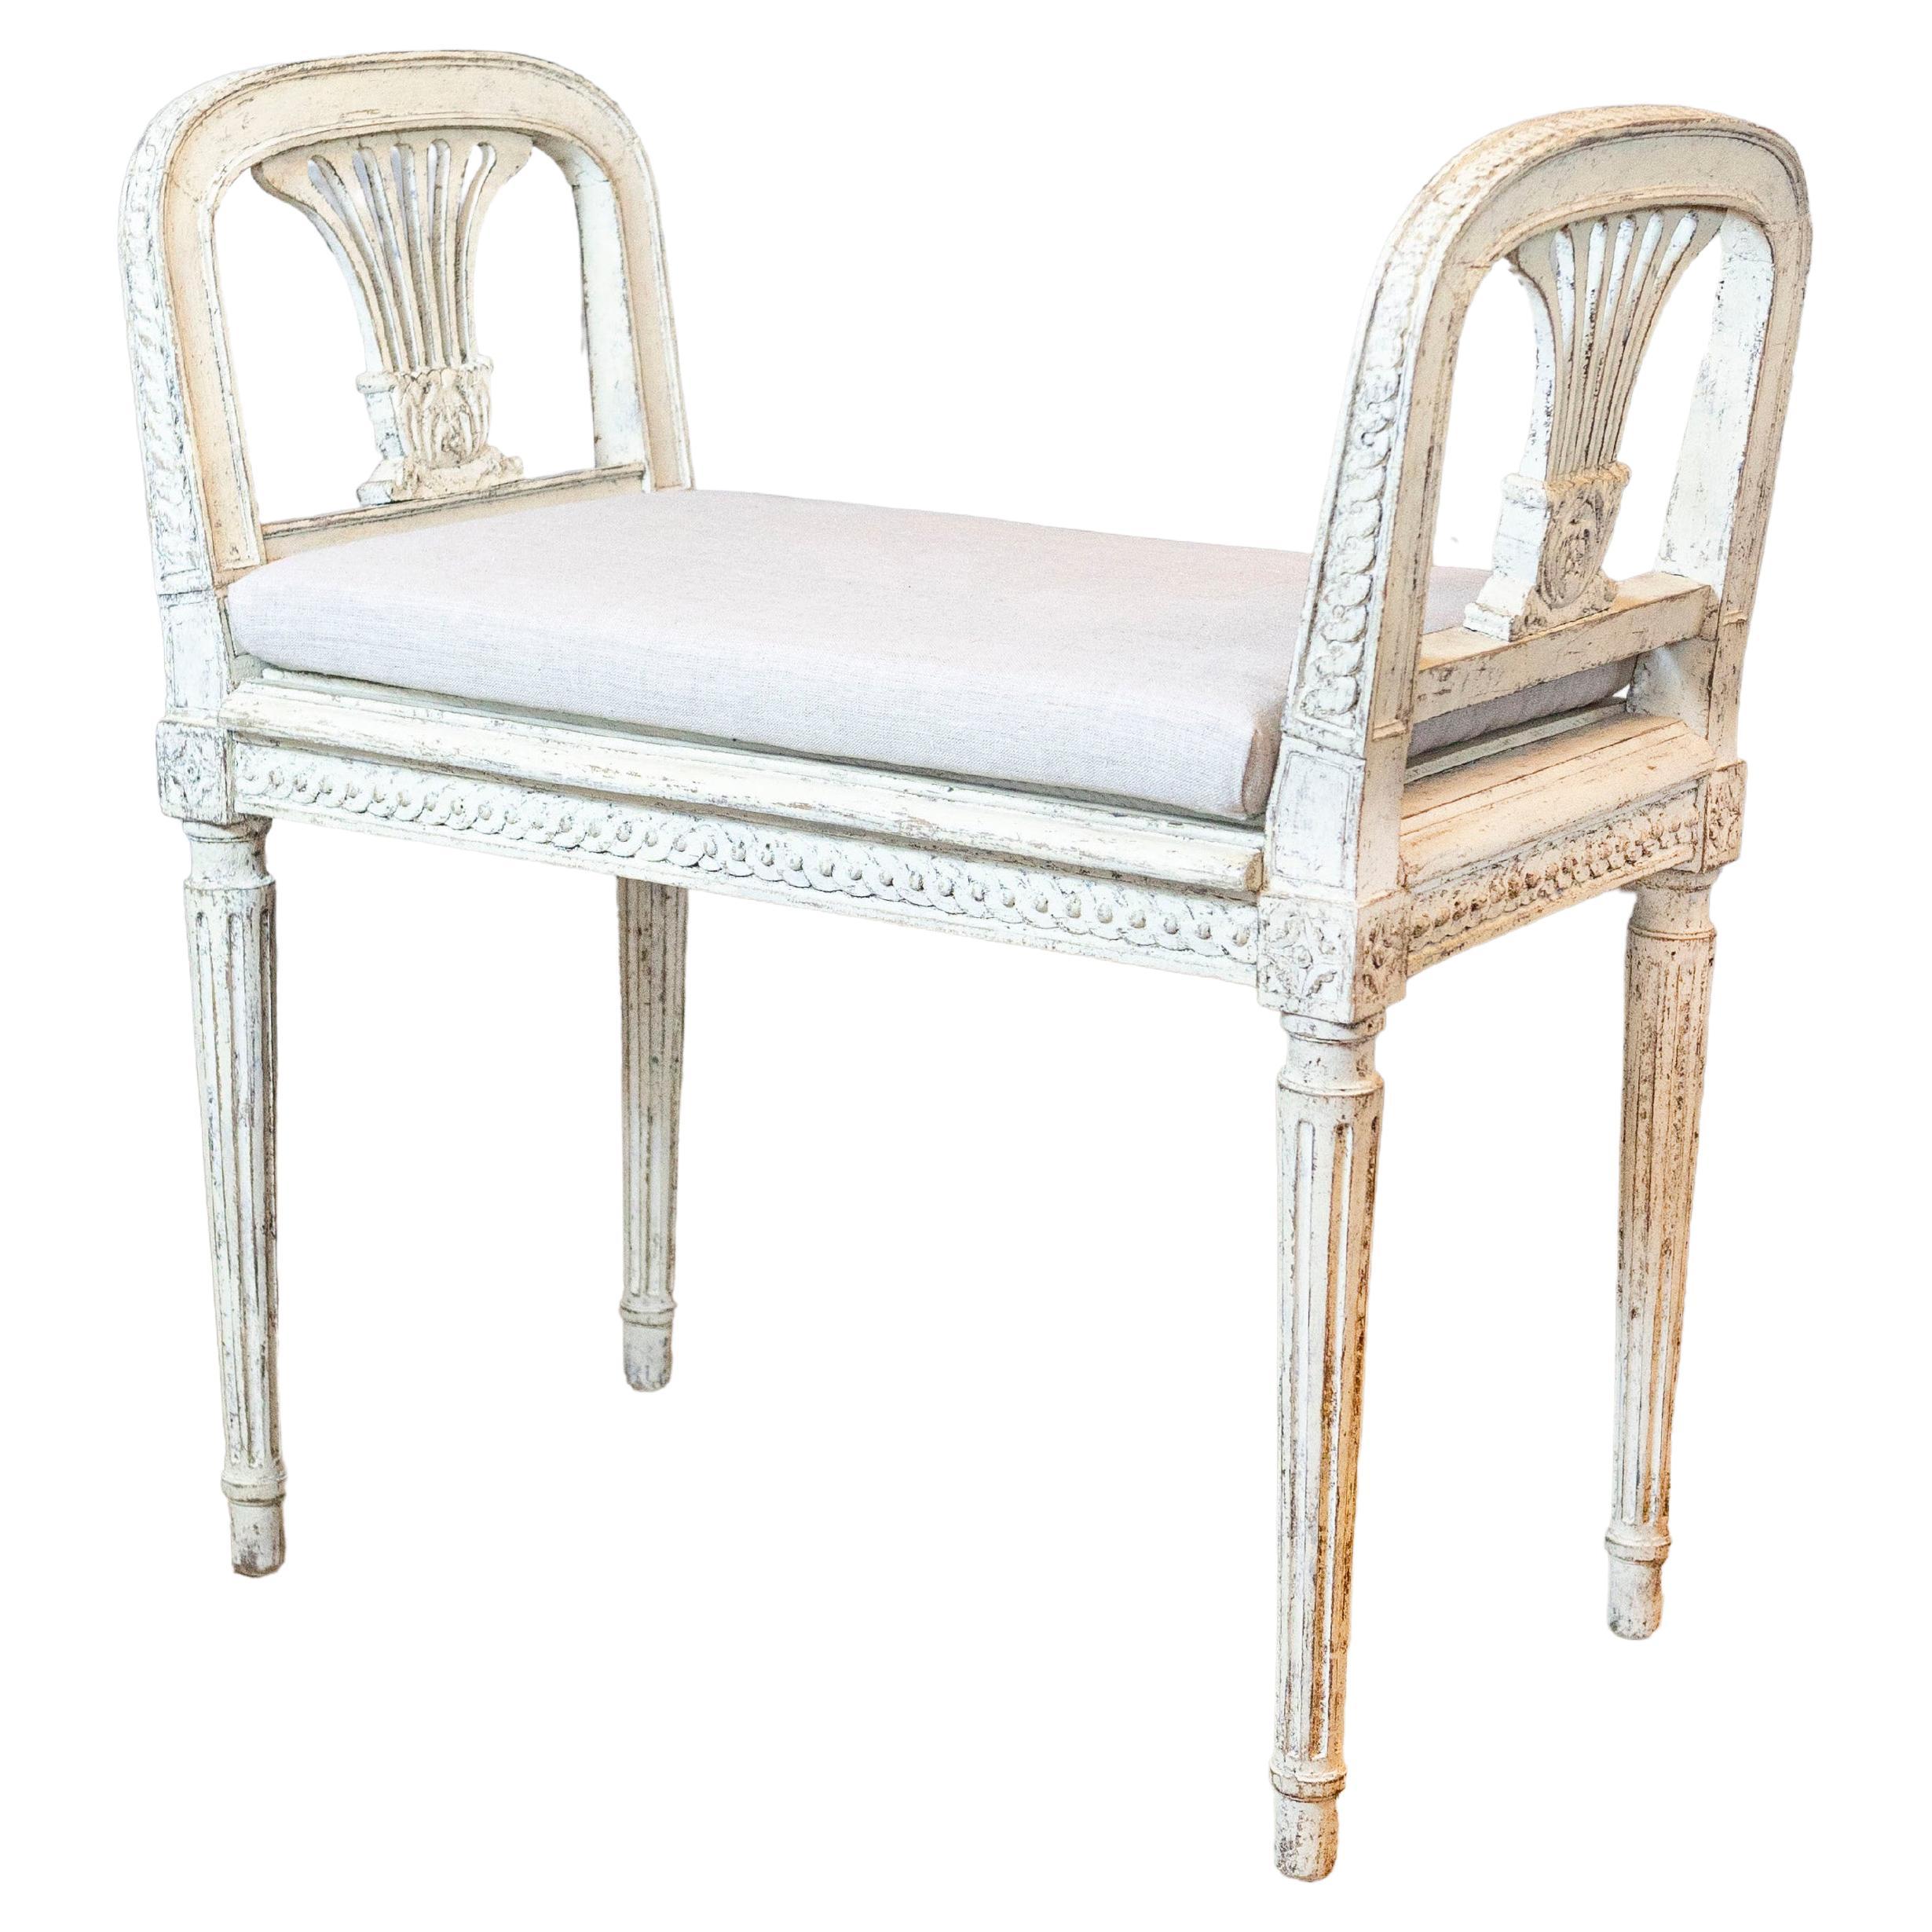 Neoclassical Style Swedish Small Painted Bench with Carved Guilloche Décor